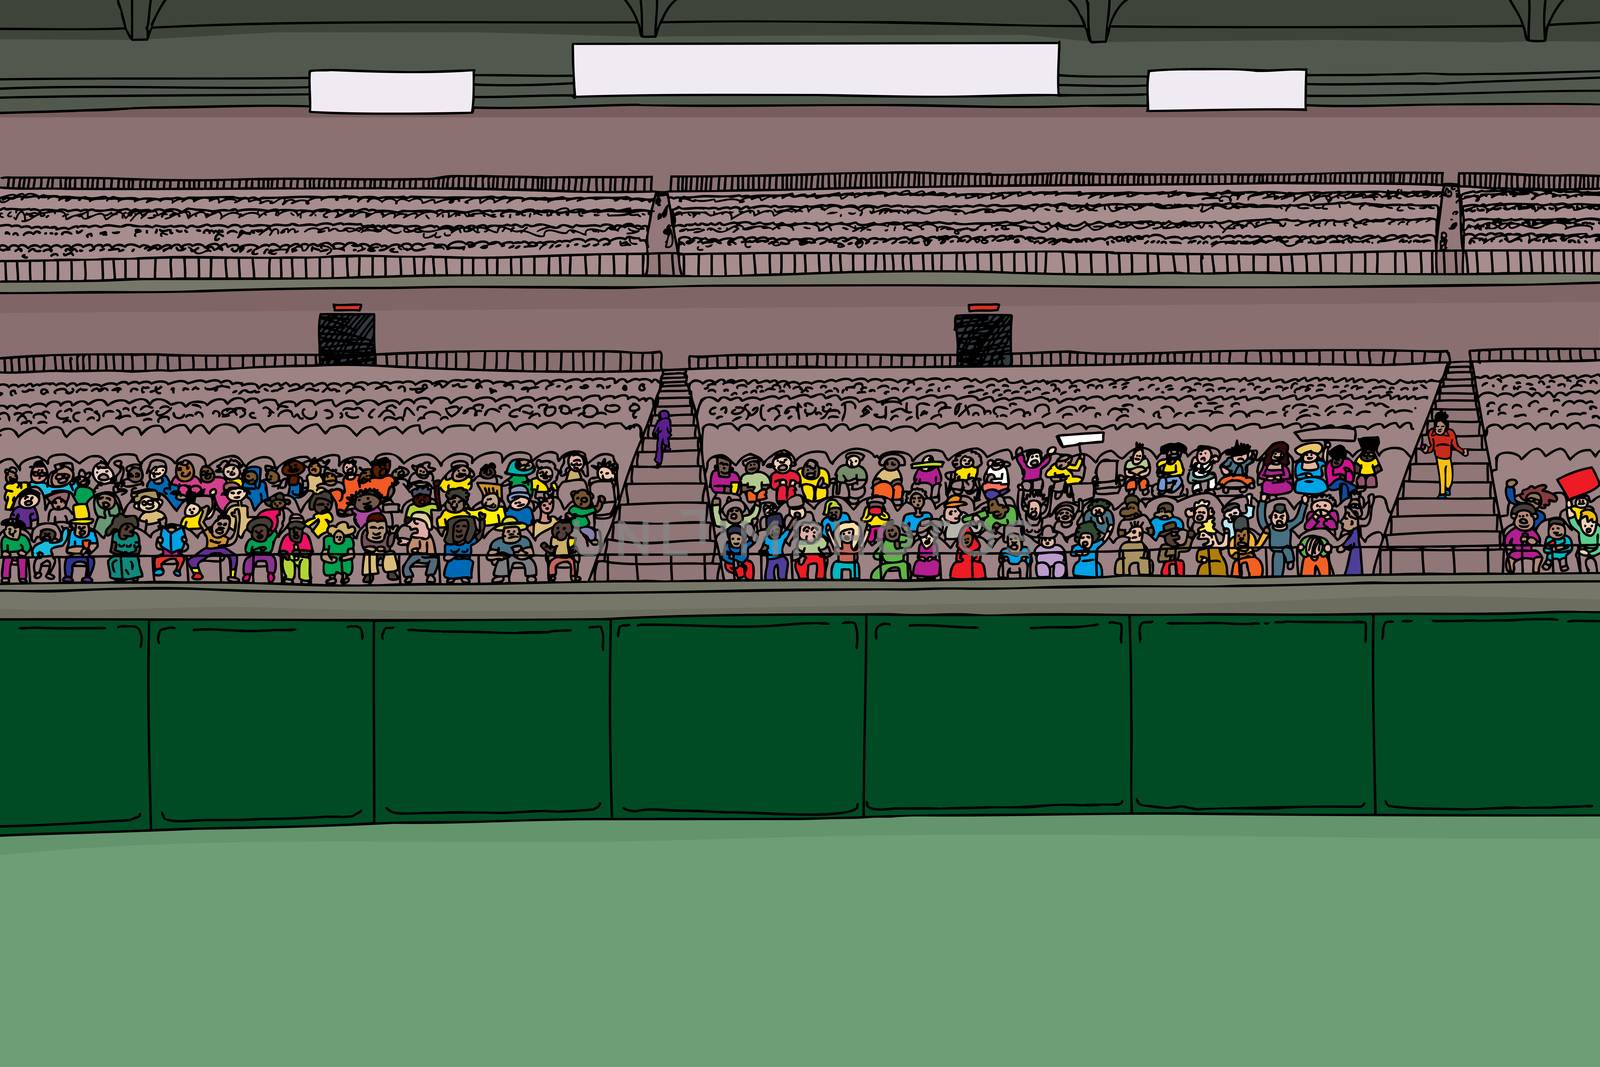 Cartoon illustration of stadium with large diverse crowd under blank scoreboard signs